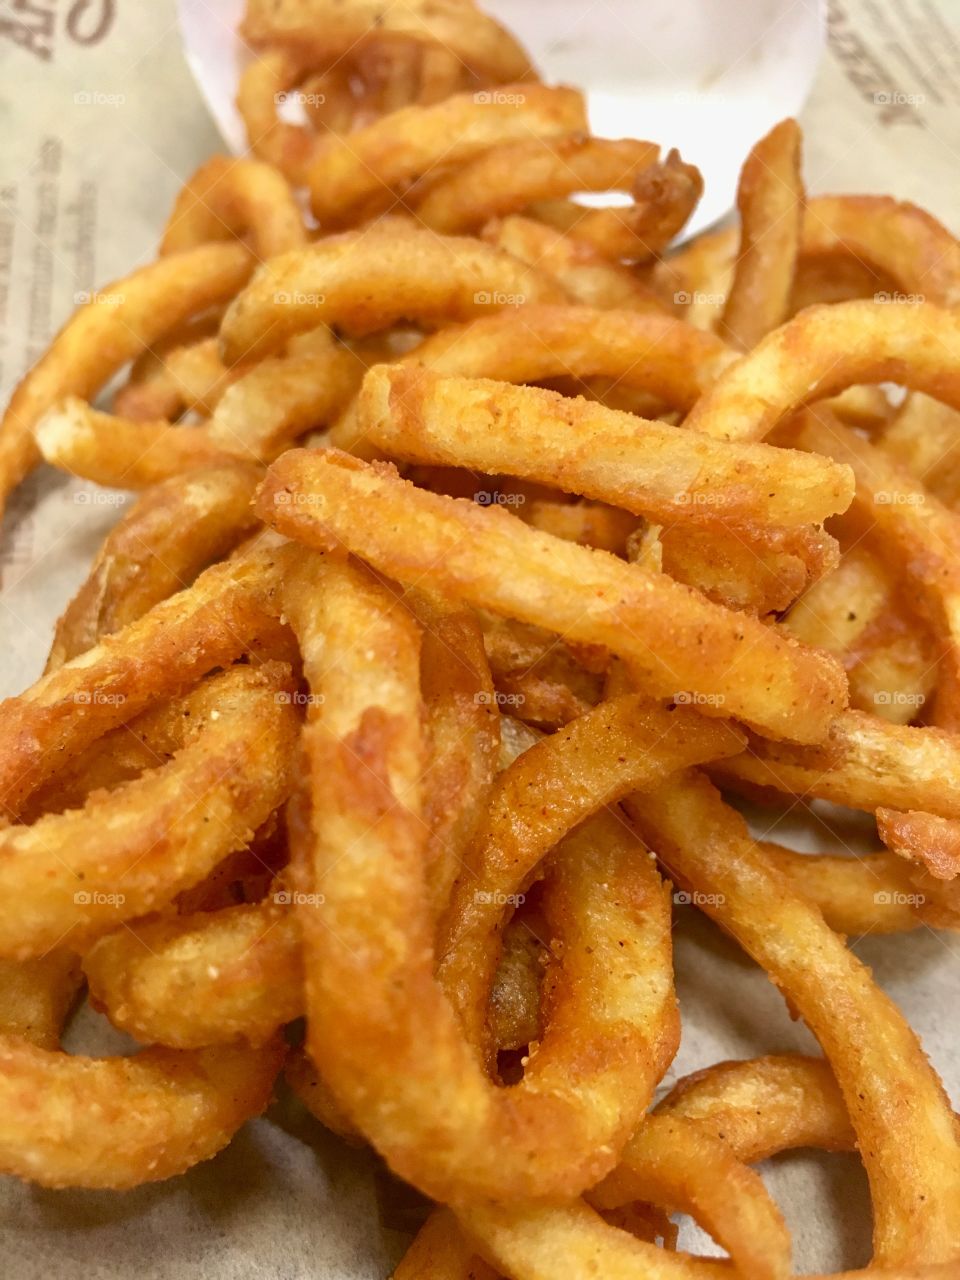 Seasoned curly fries from Arby’s